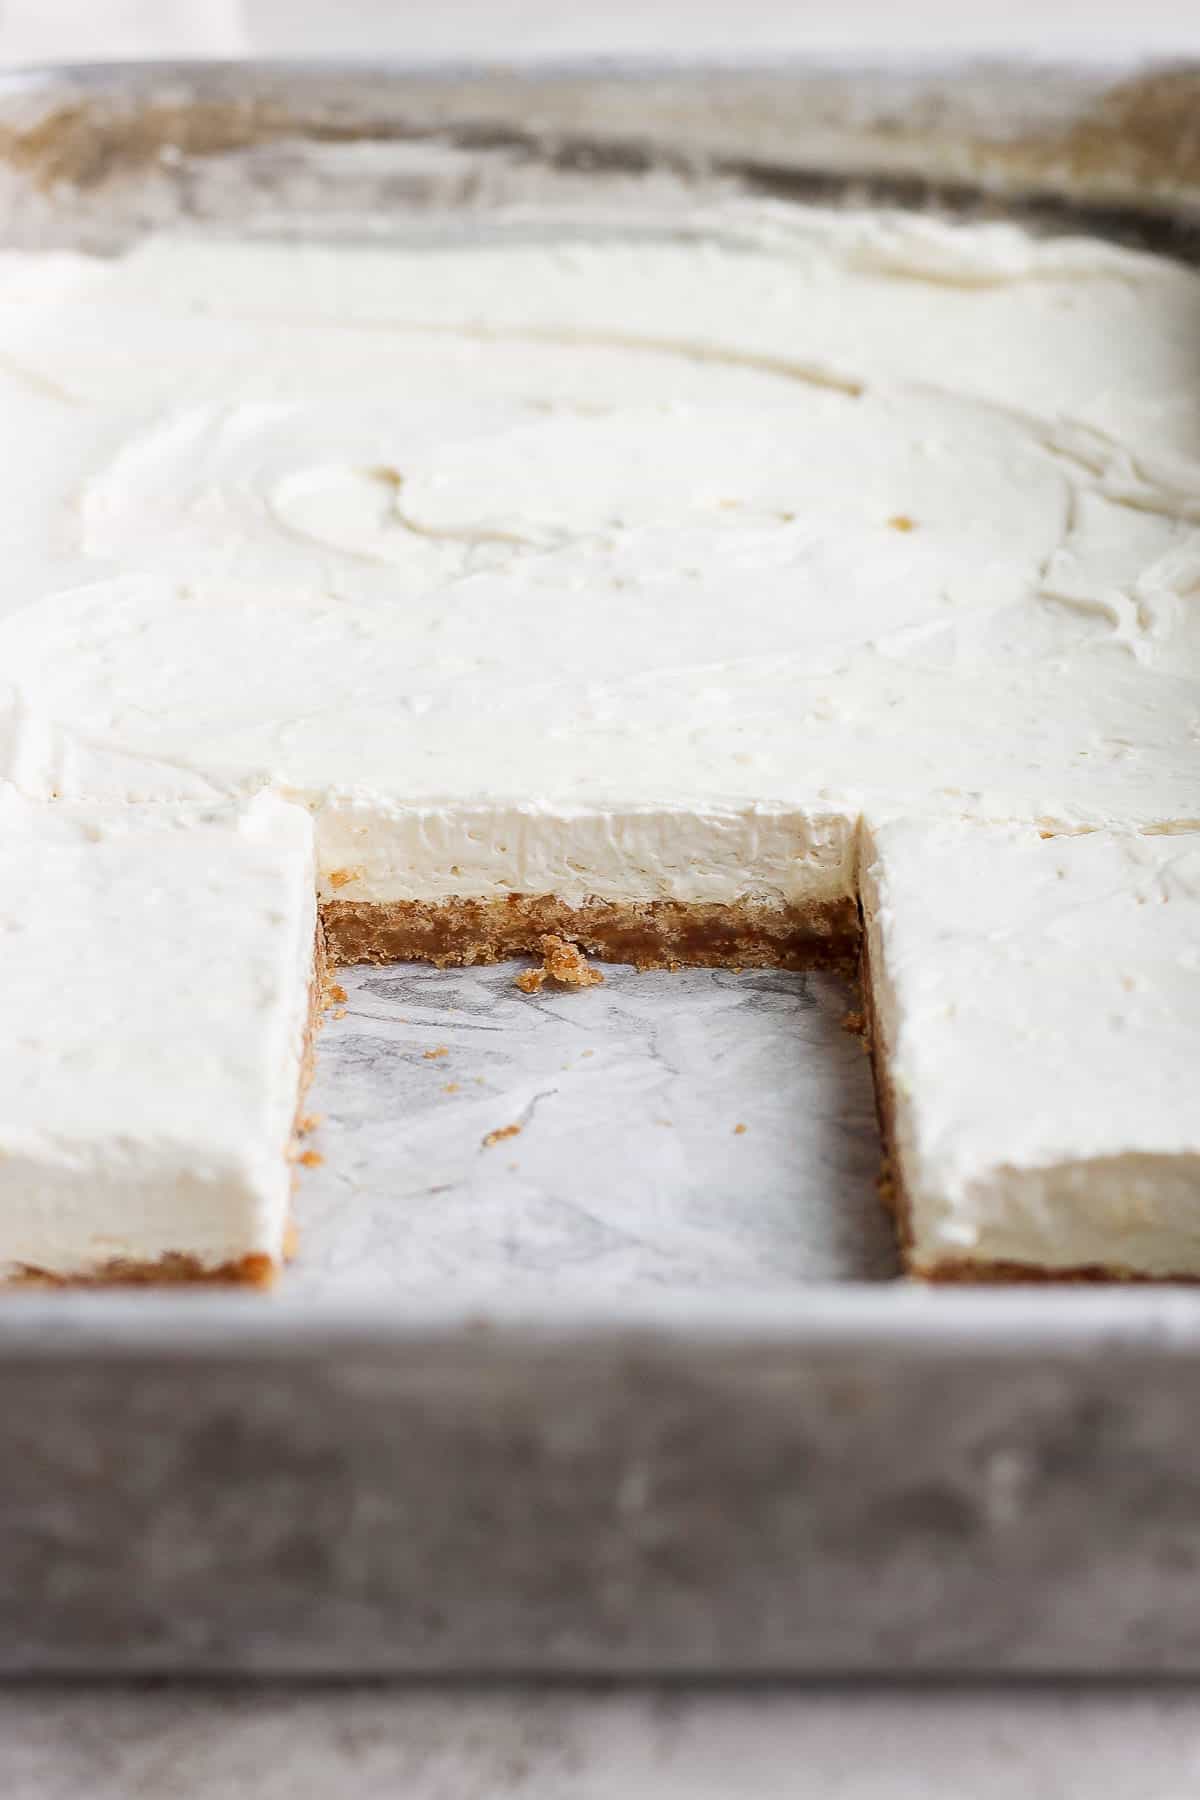 A piece of the key lime cheese cake missing from the baking sheet.